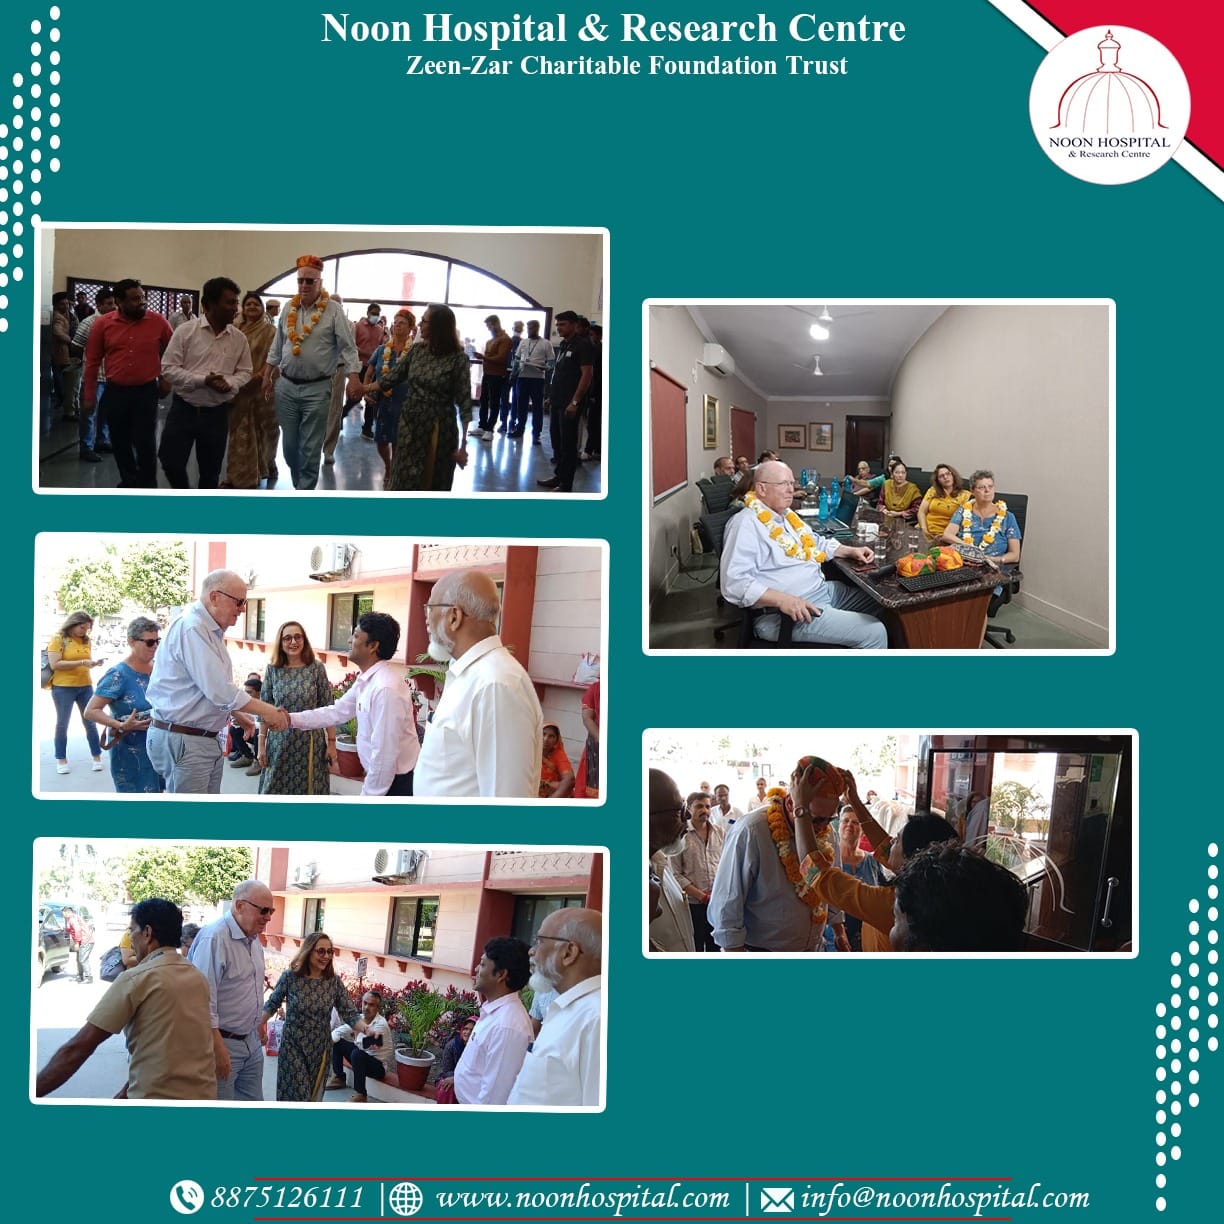 Noon Memorial Legacy Trust, London U.K. Trustee, Mr. David Robinson, and his wife visited Noon Hospital and Research Centre.